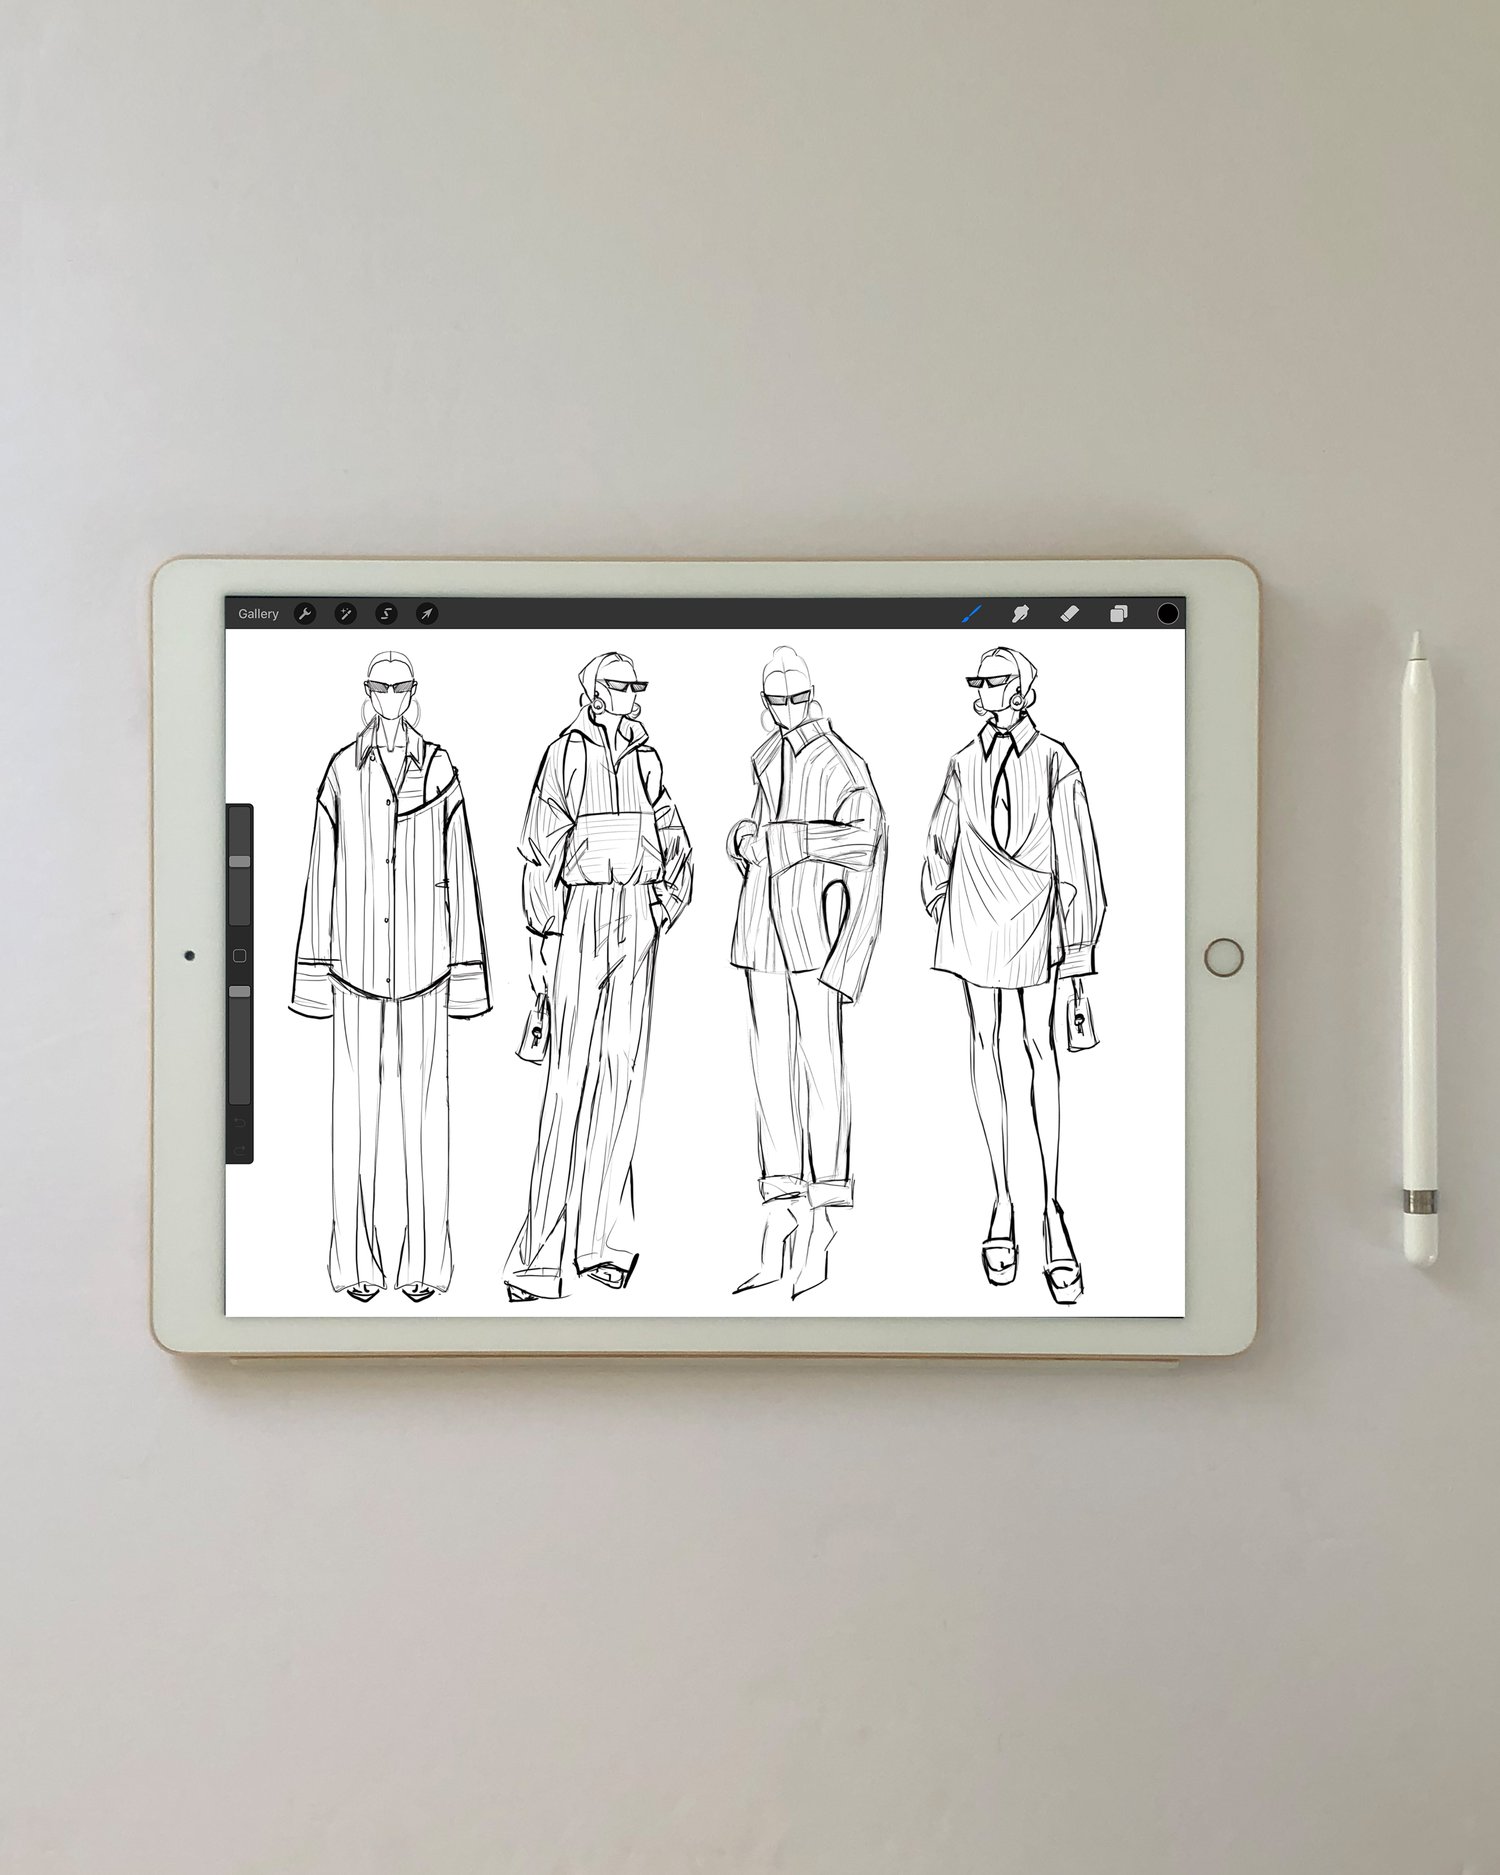 My Sketching Process: From 9-Head Fashion Figures to Designing for My Body